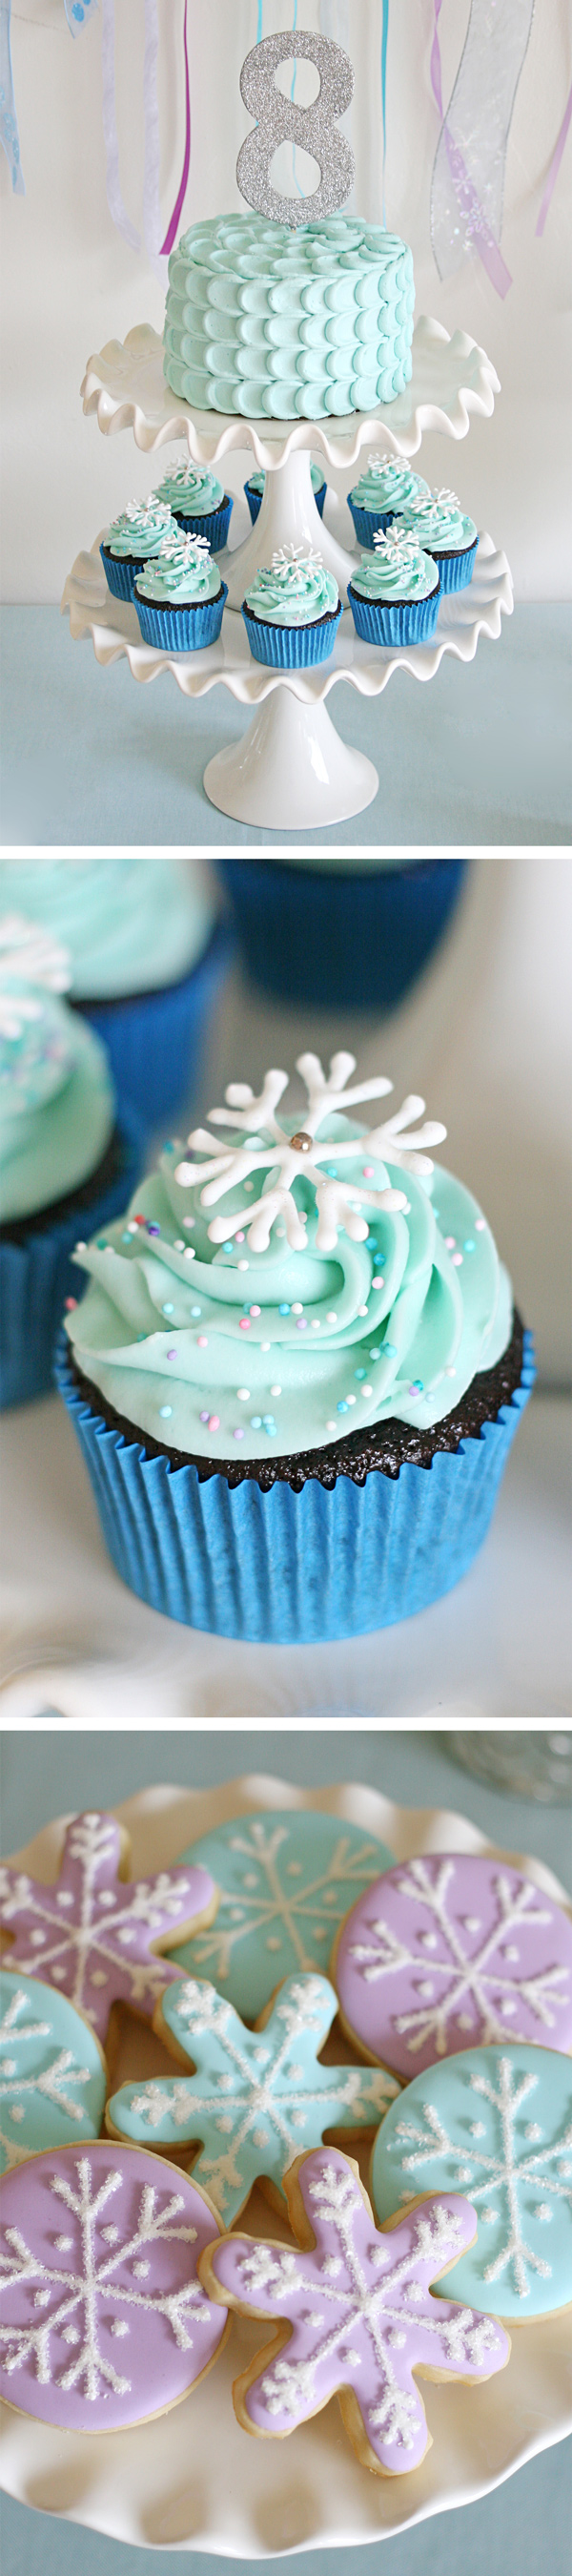 Beautiful ideas for a Frozen themed birthday!  Perfect for any winter party!   